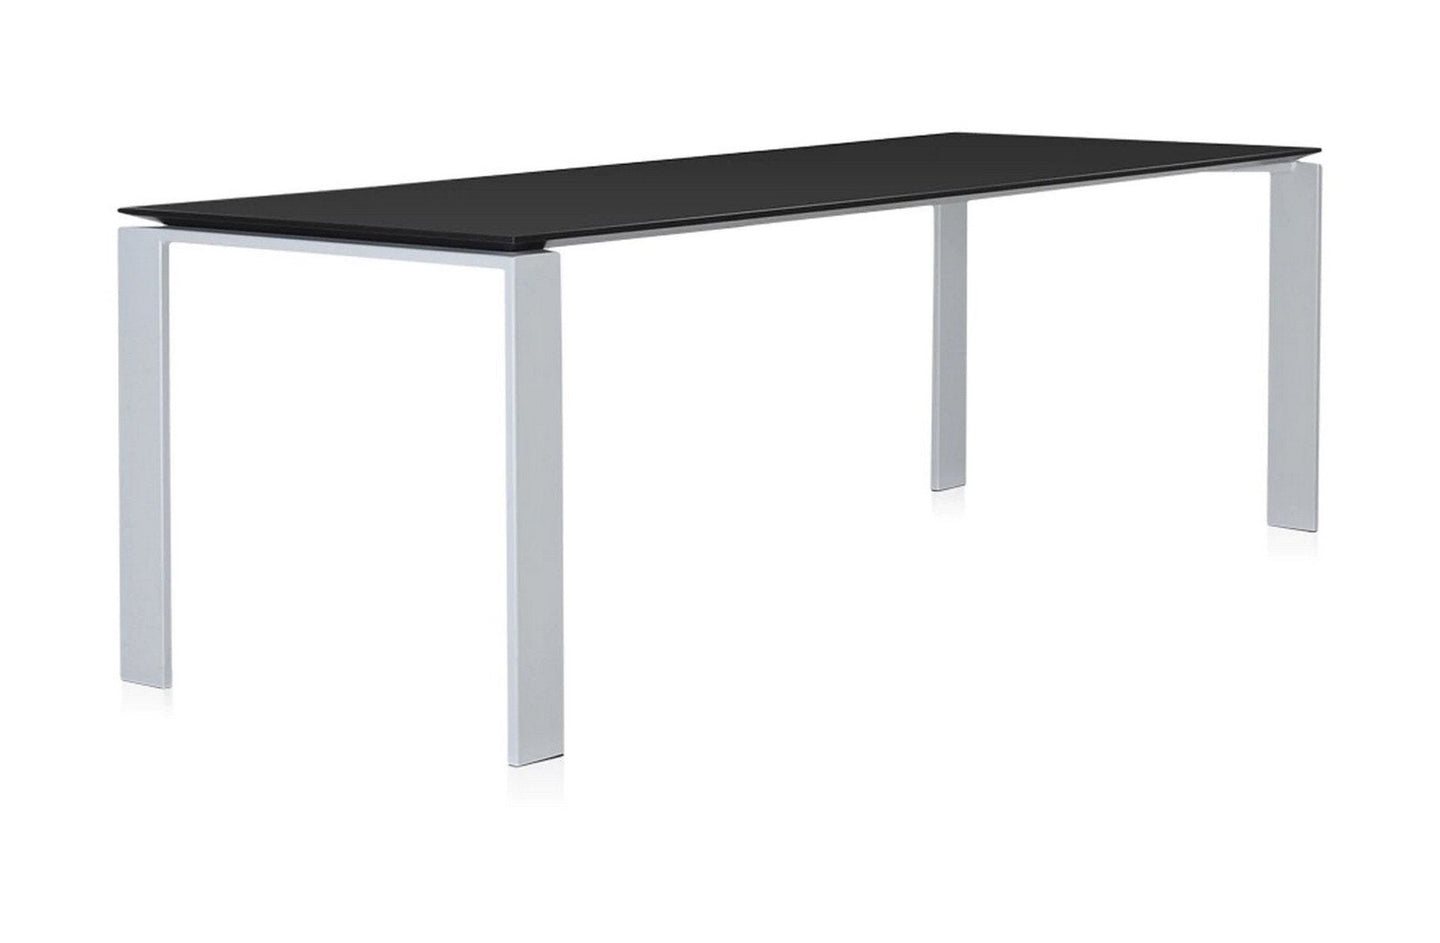 Four Large Table
